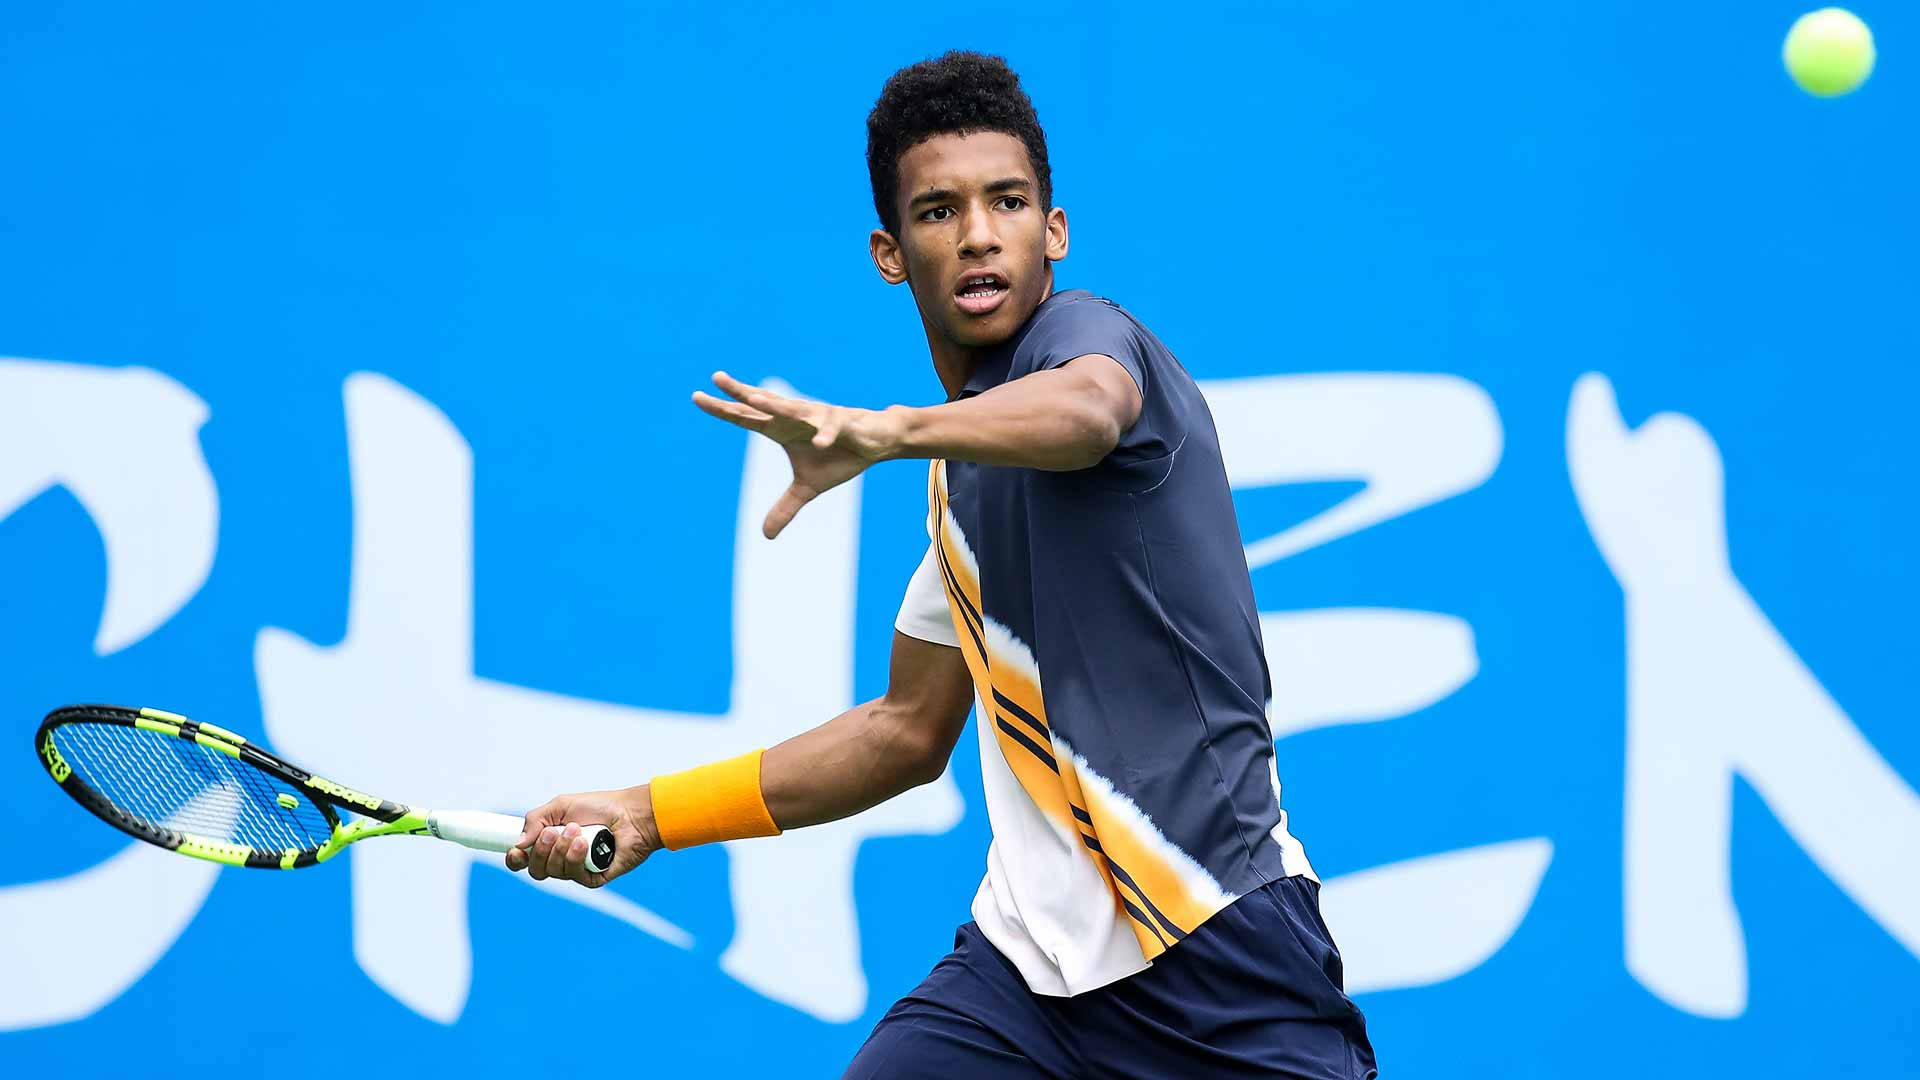 Felix Auger-Aliassime Concentrating on the Ball in Tennis match Wallpaper